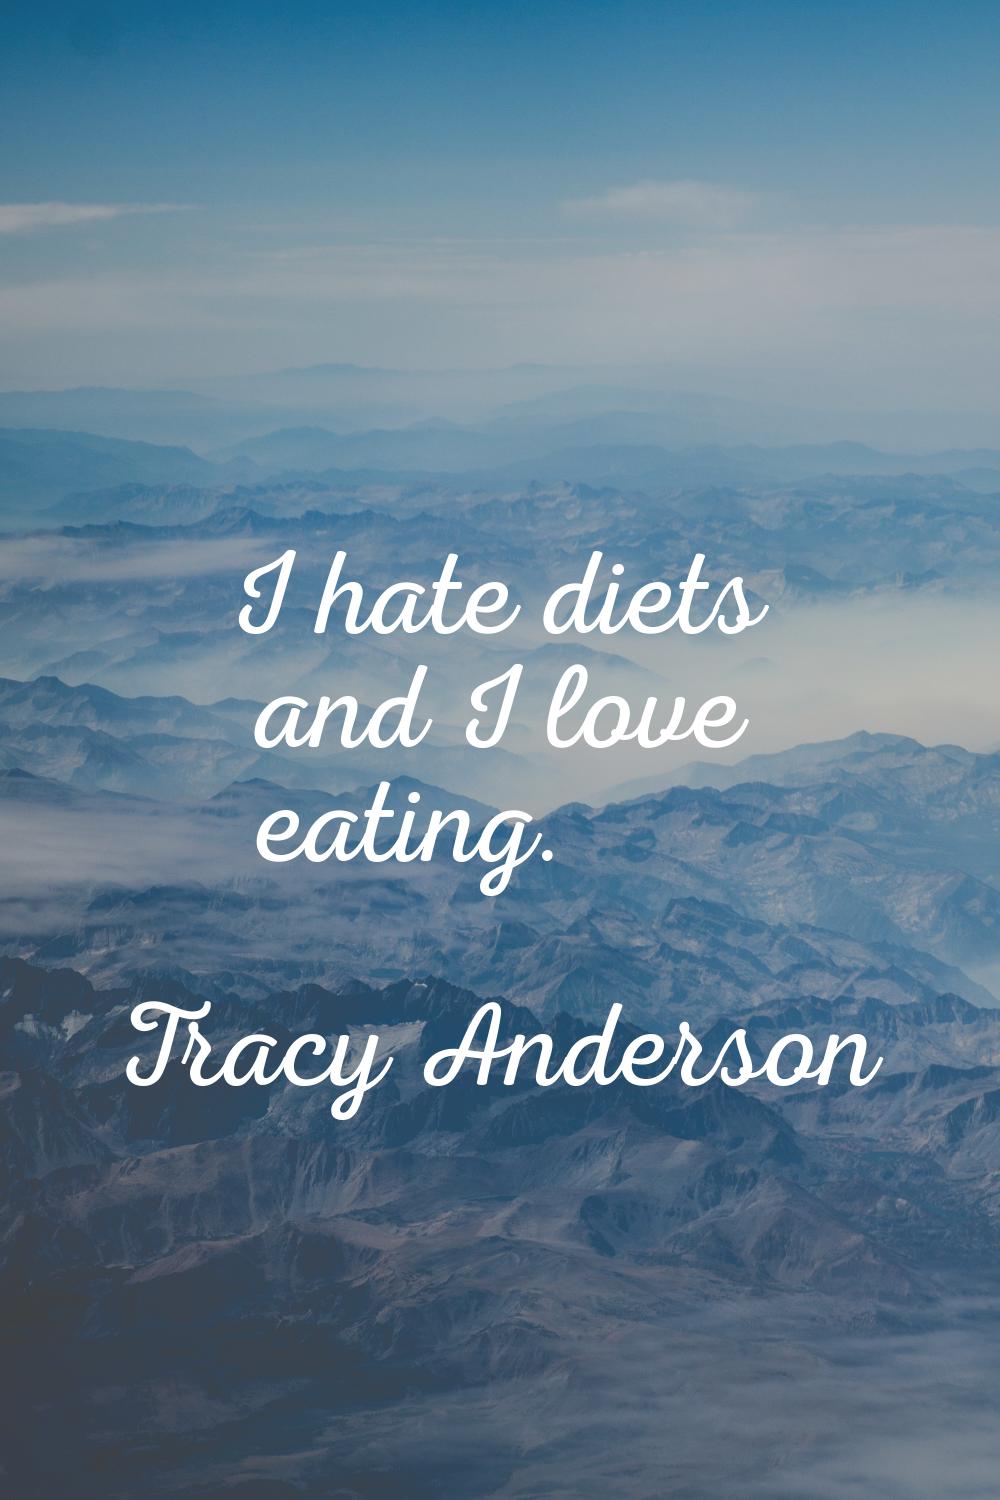 I hate diets and I love eating.